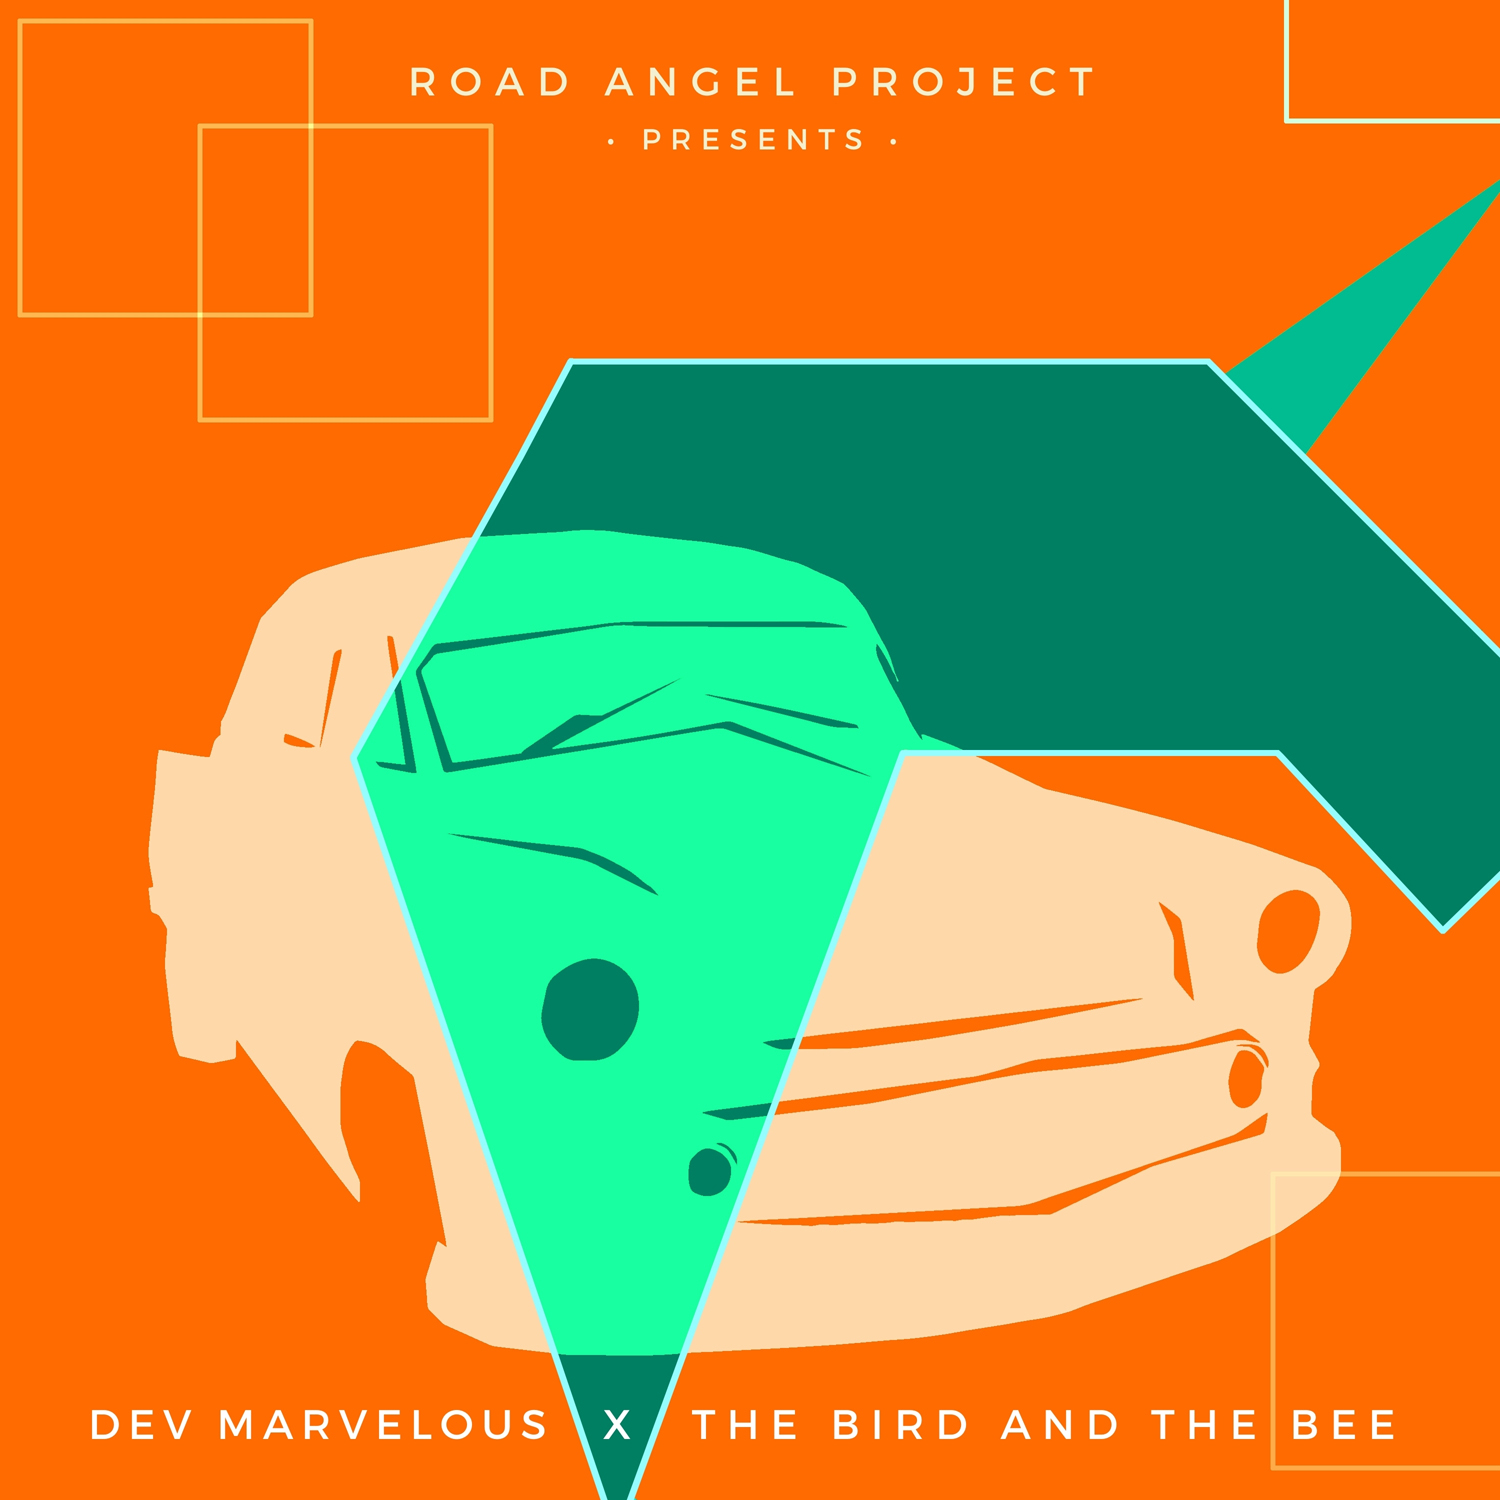 Dev Marvelous x The Bird and the Bee (Road Angel Project VI)